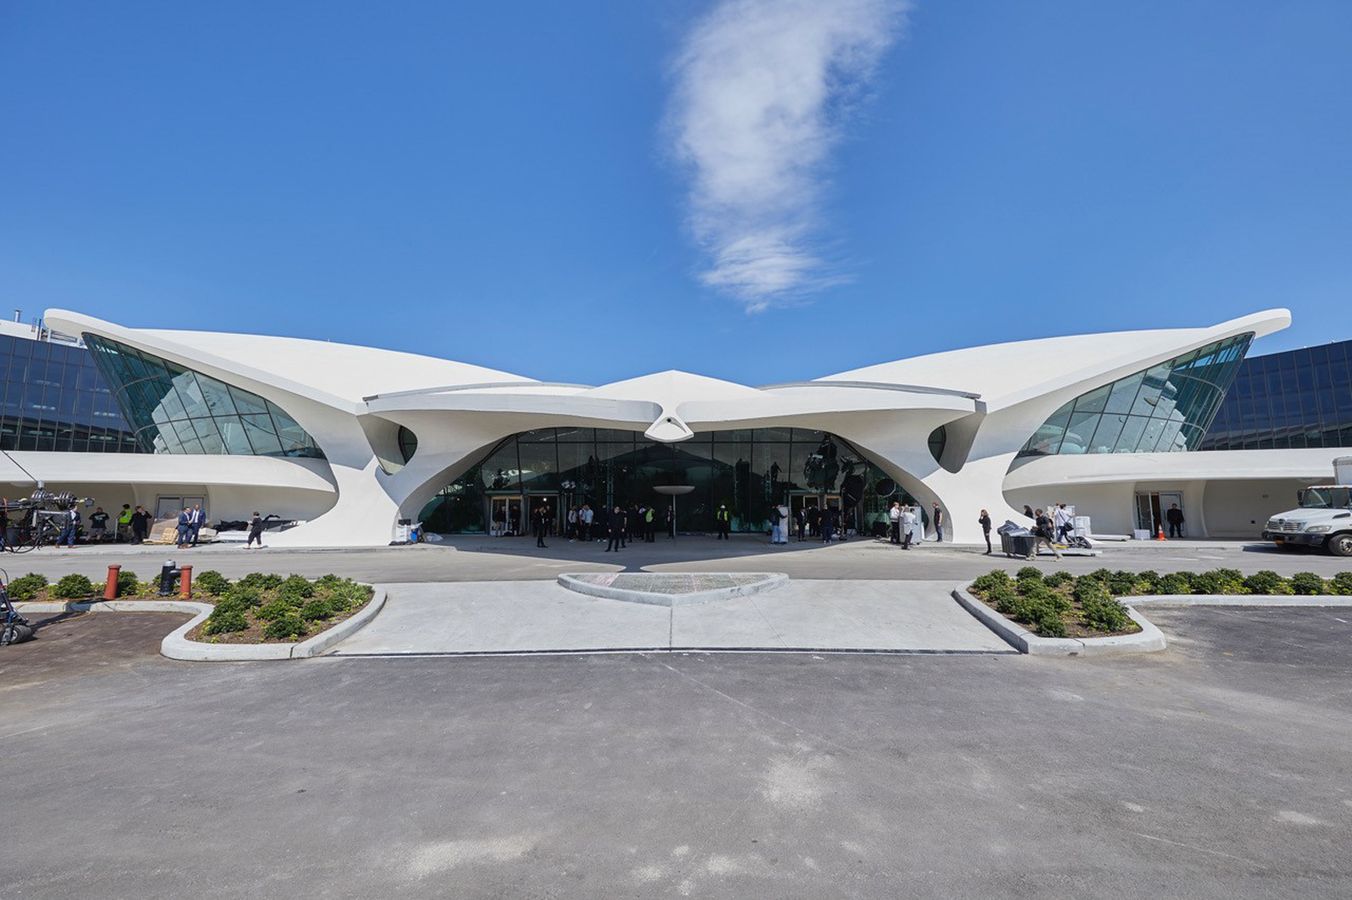 Louis Vuitton Cruise 2020 Collection Staged at the TWA Hotel